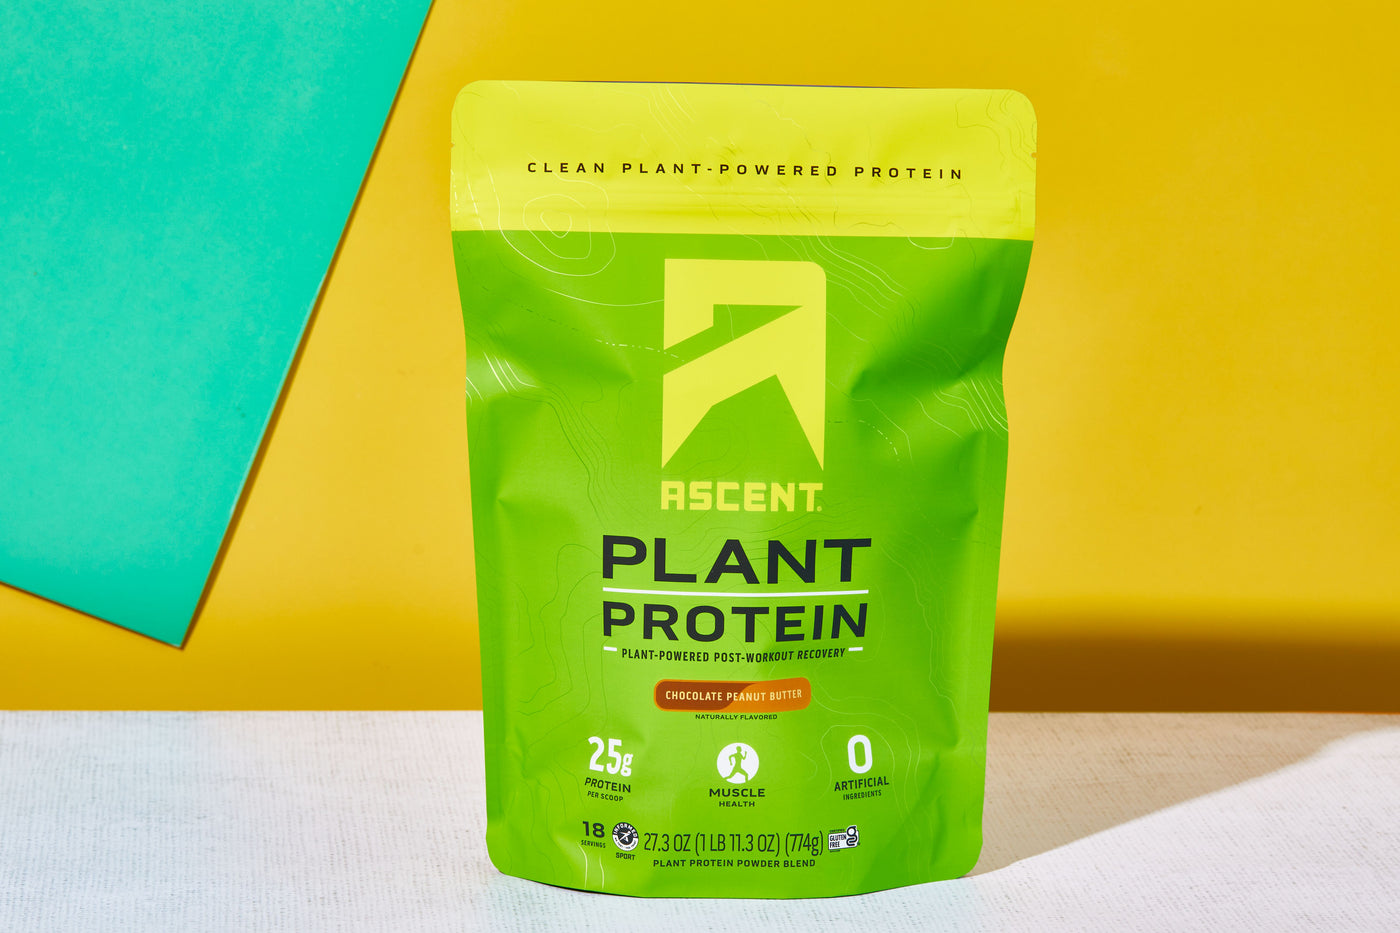 Ascent Plant Protein Launches New Chocolate Peanut Butter Flavor